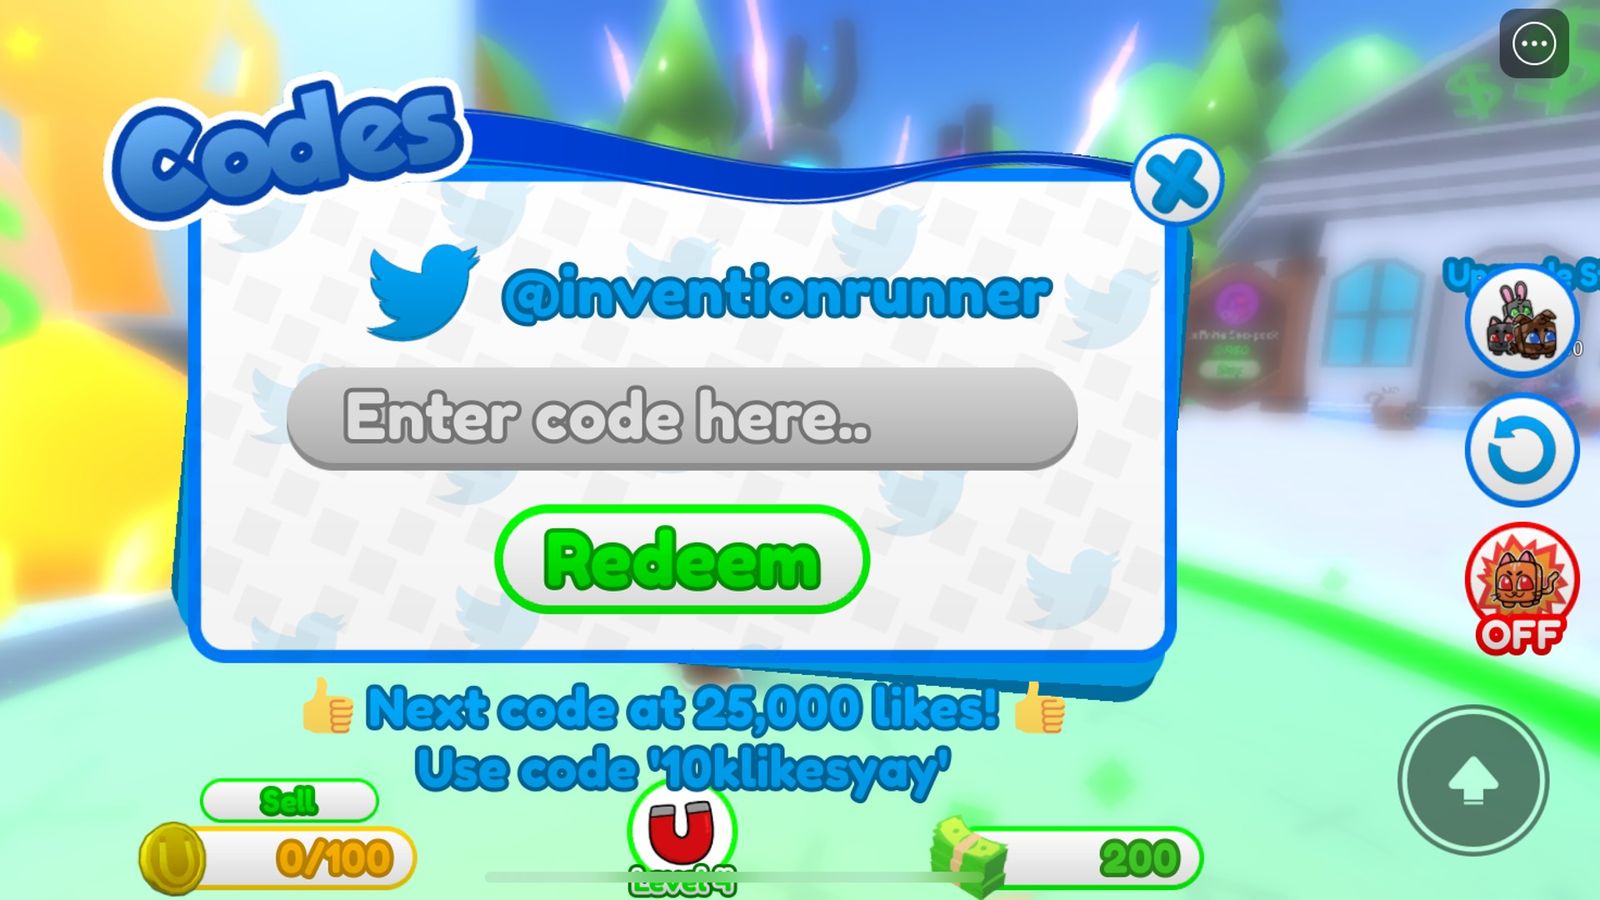 Screenshot of the Magnet Simulator 2 code redemption page.